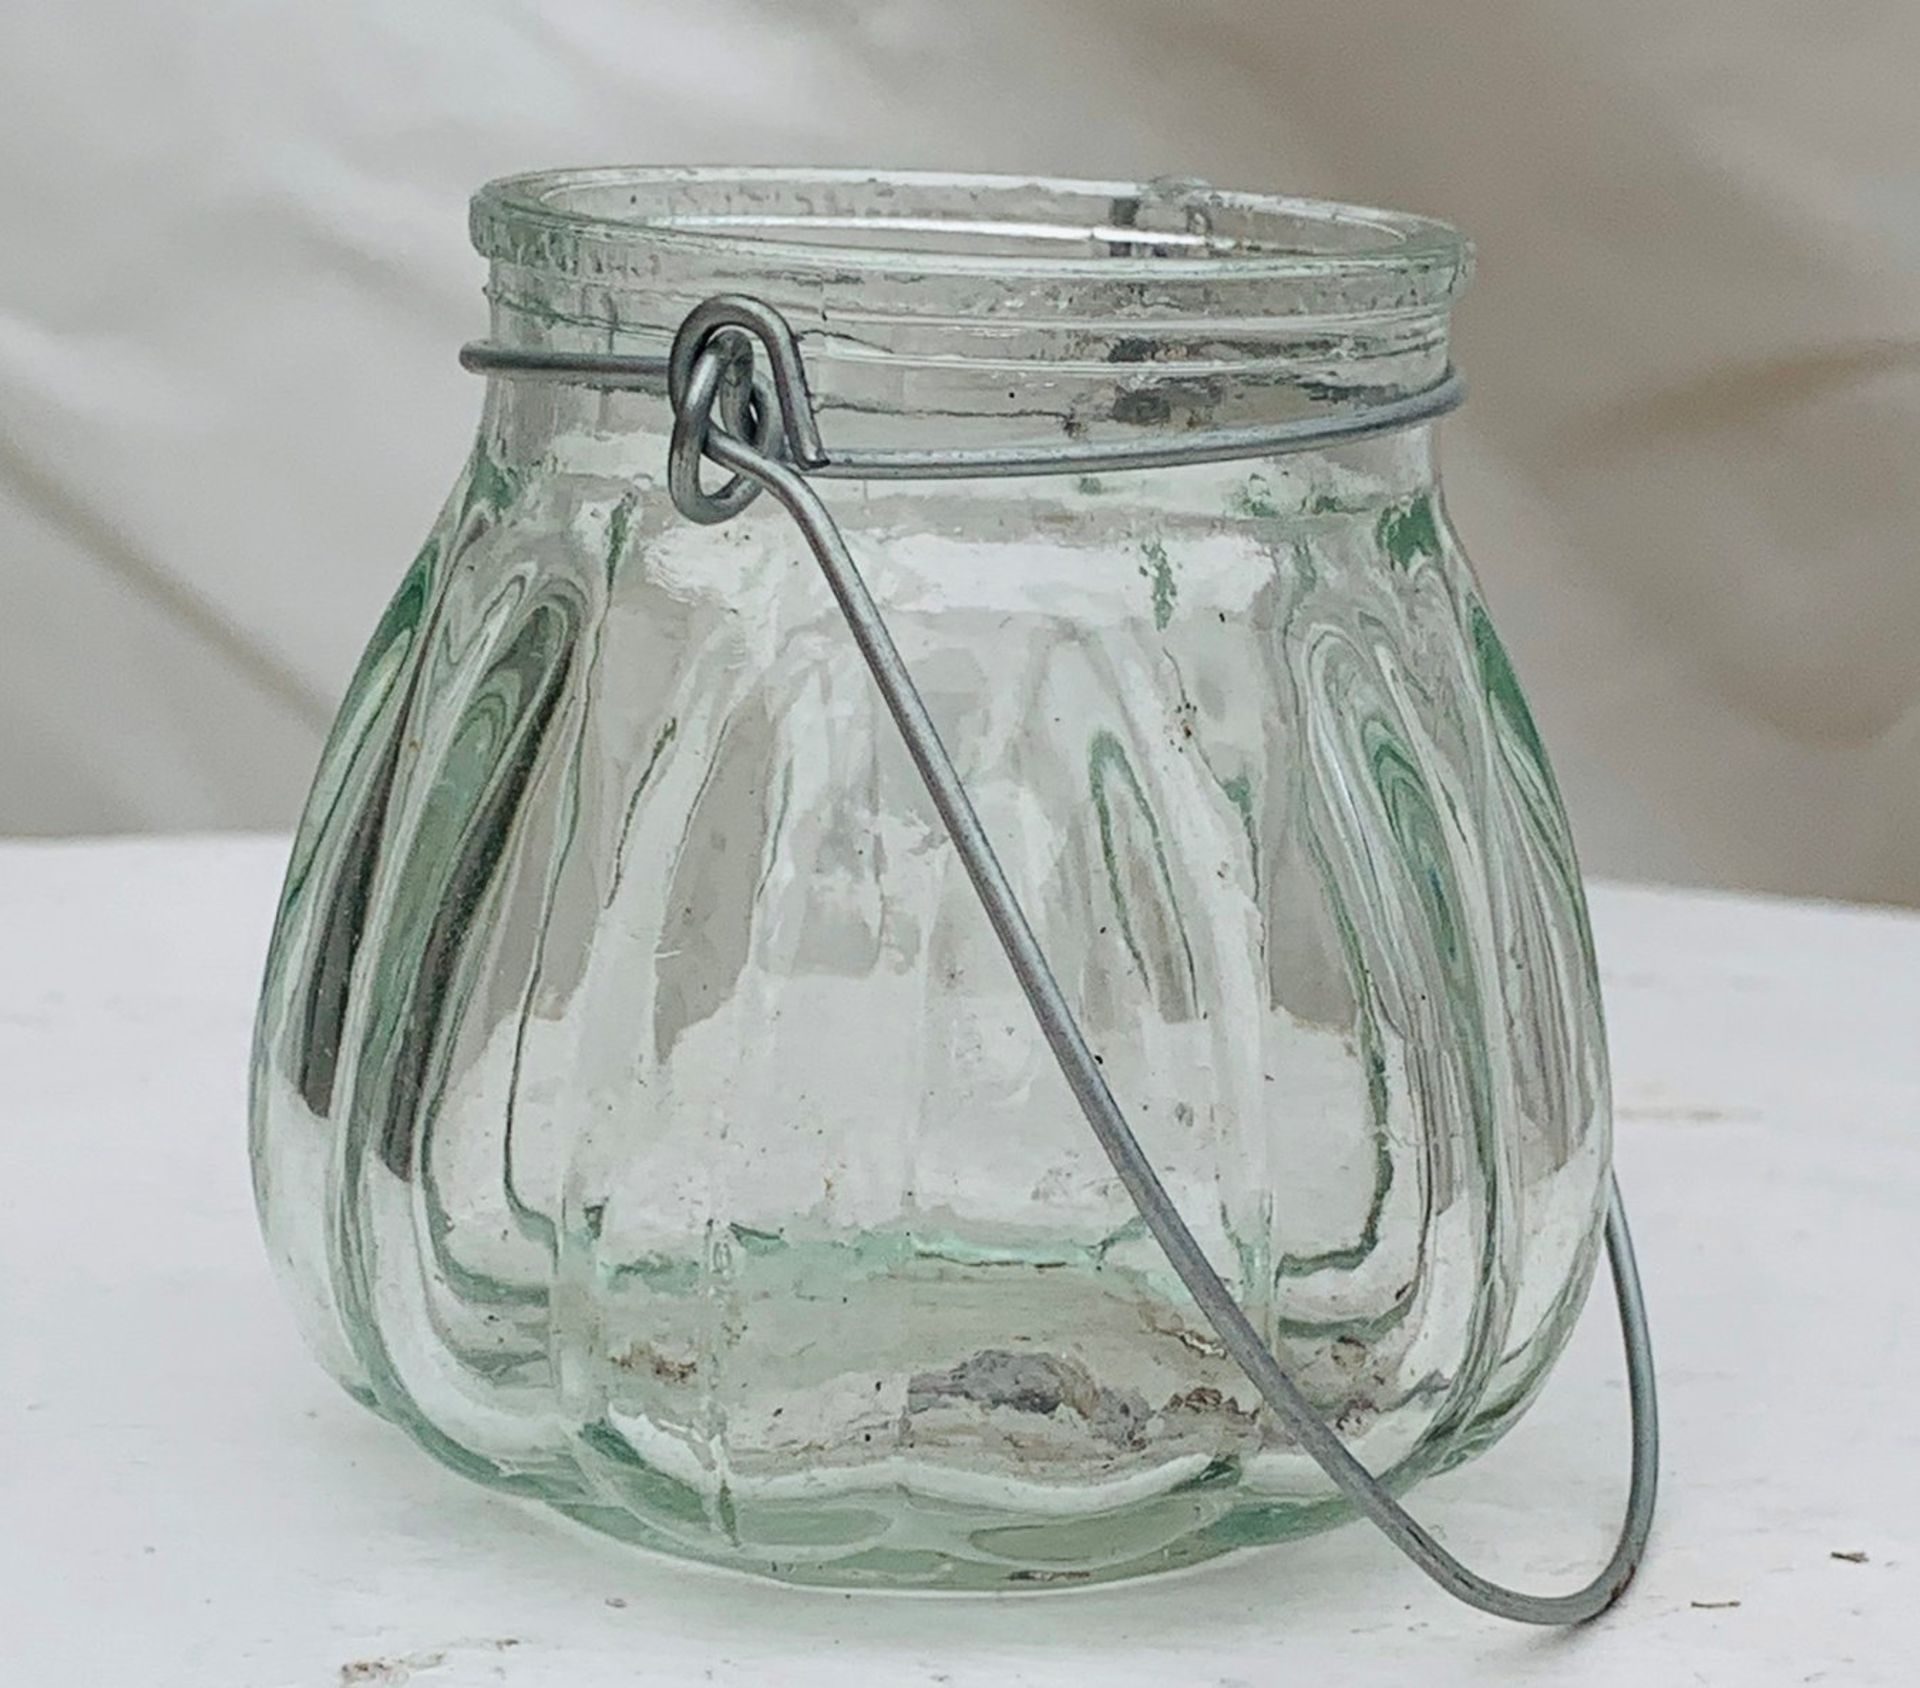 20 x Mini Glass Hanging Jars - Dimensions: Approx. 7/8cm - Pre-owned - CL548 - Location: Near Market